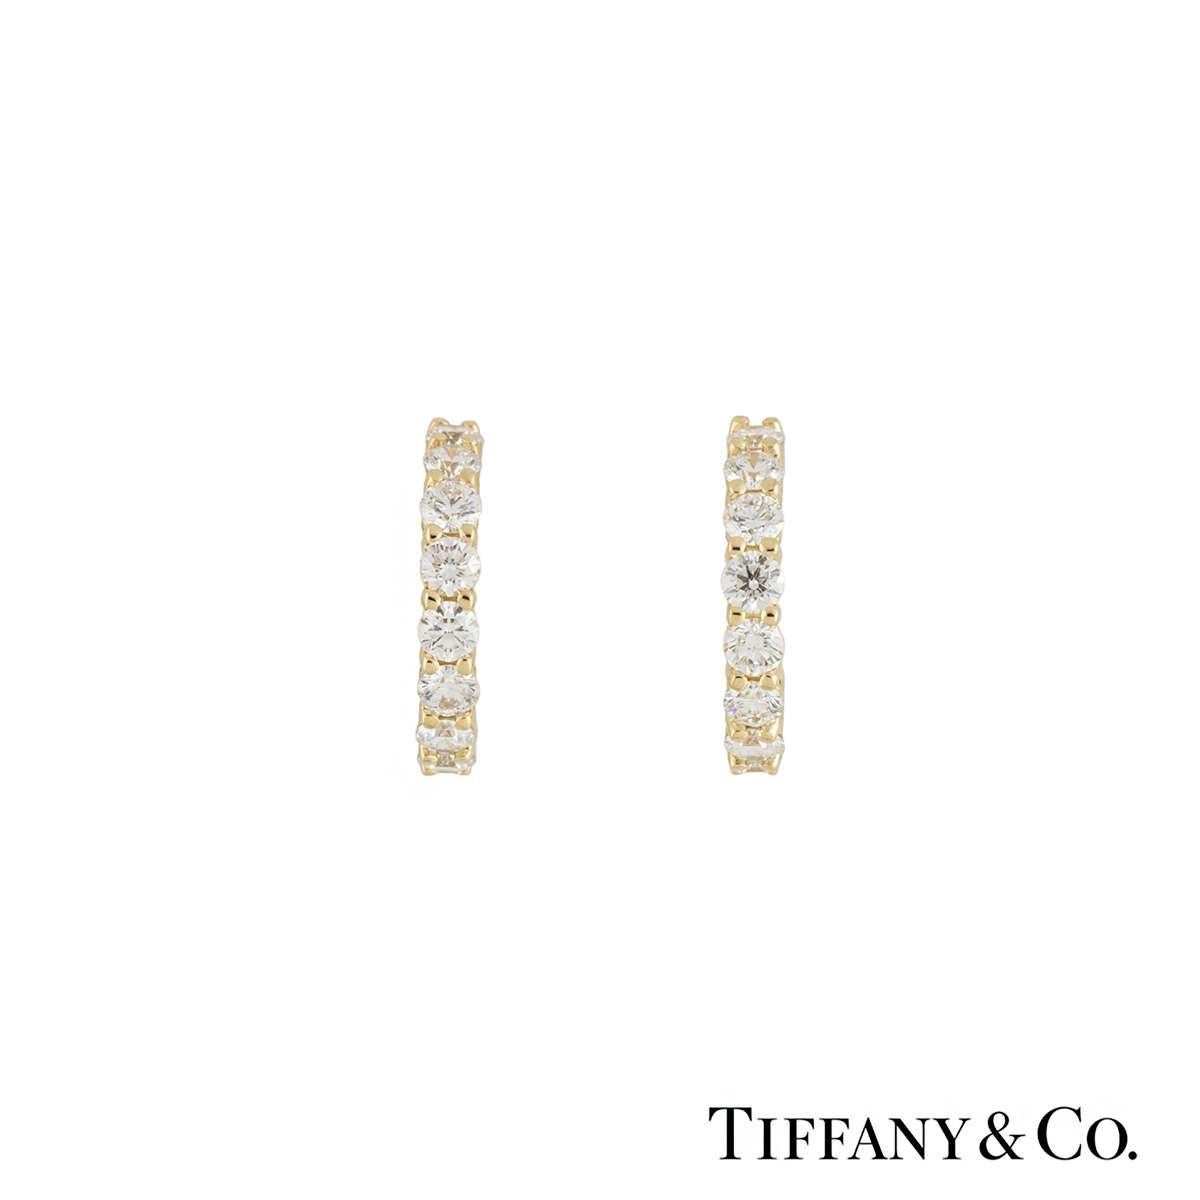 A pair of 18k yellow gold diamond hoop earrings by Tiffany & Co. Each hoop has 10 claw set round brilliant cut diamonds totalling 0.60ct, G colour and VS in clarity. The earrings measure 1.2cm in length and have post and alpha back fittings, with a